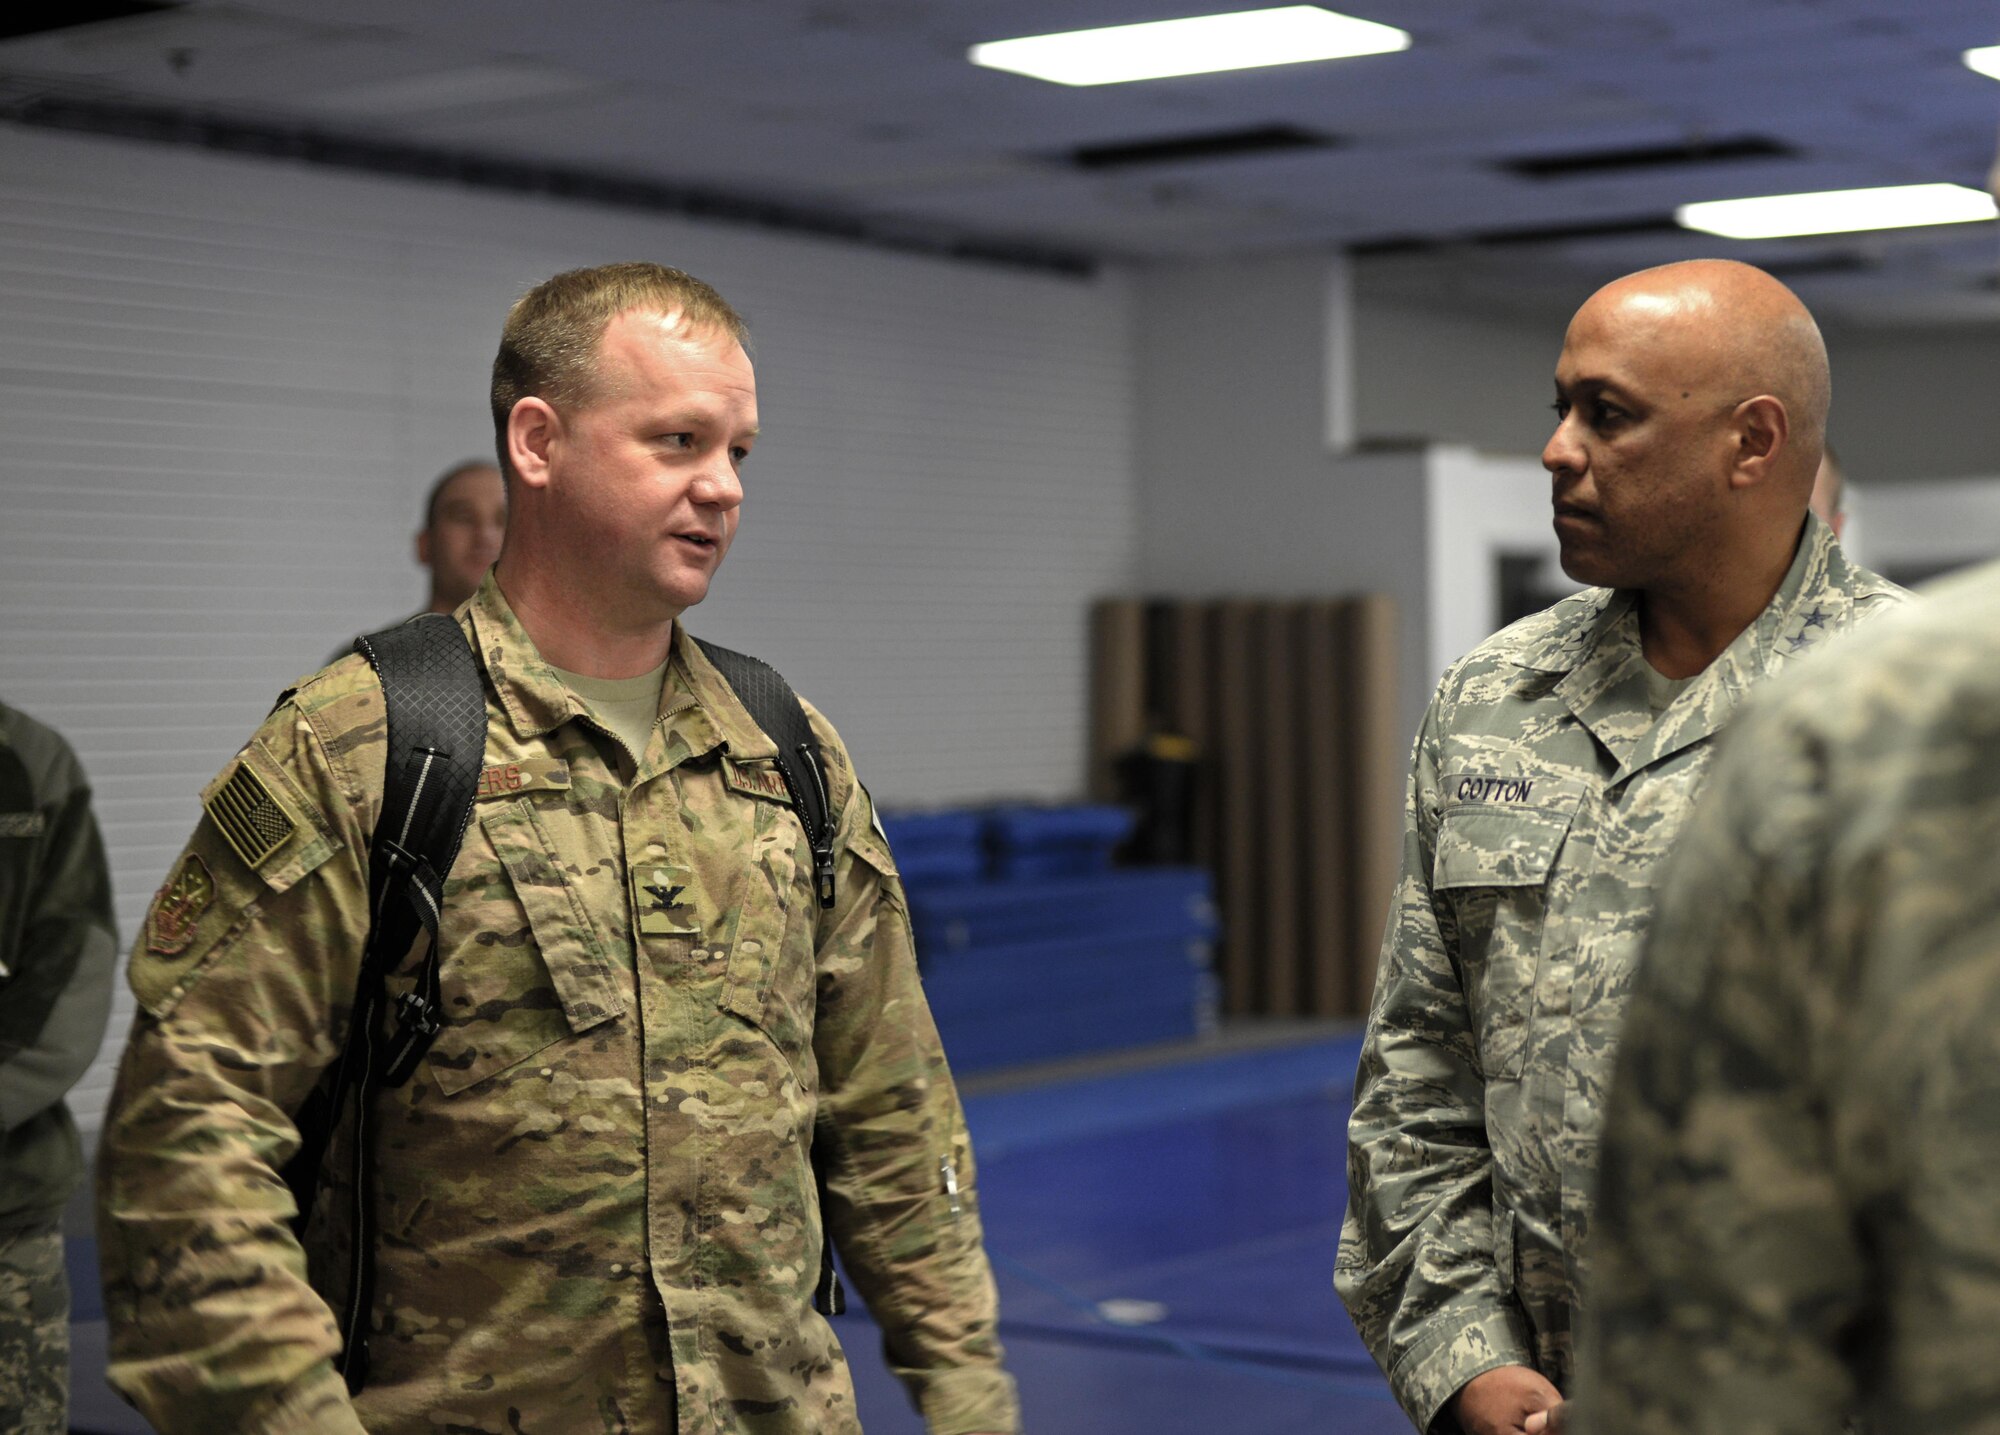 Maj. Gen. Anthony Cotton, 20th Air Force commander, speaks with Airmen at Minot Air Force Base, N.D., April 28, 2017. The 20th AF mission is to prepare the Nation's intercontinental ballistic missile force to execute safe, secure, and effective nuclear strike operations and support worldwide combatant command requirements. (U.S. Air Force photo/Airman 1st Class Austin M. Thomas)